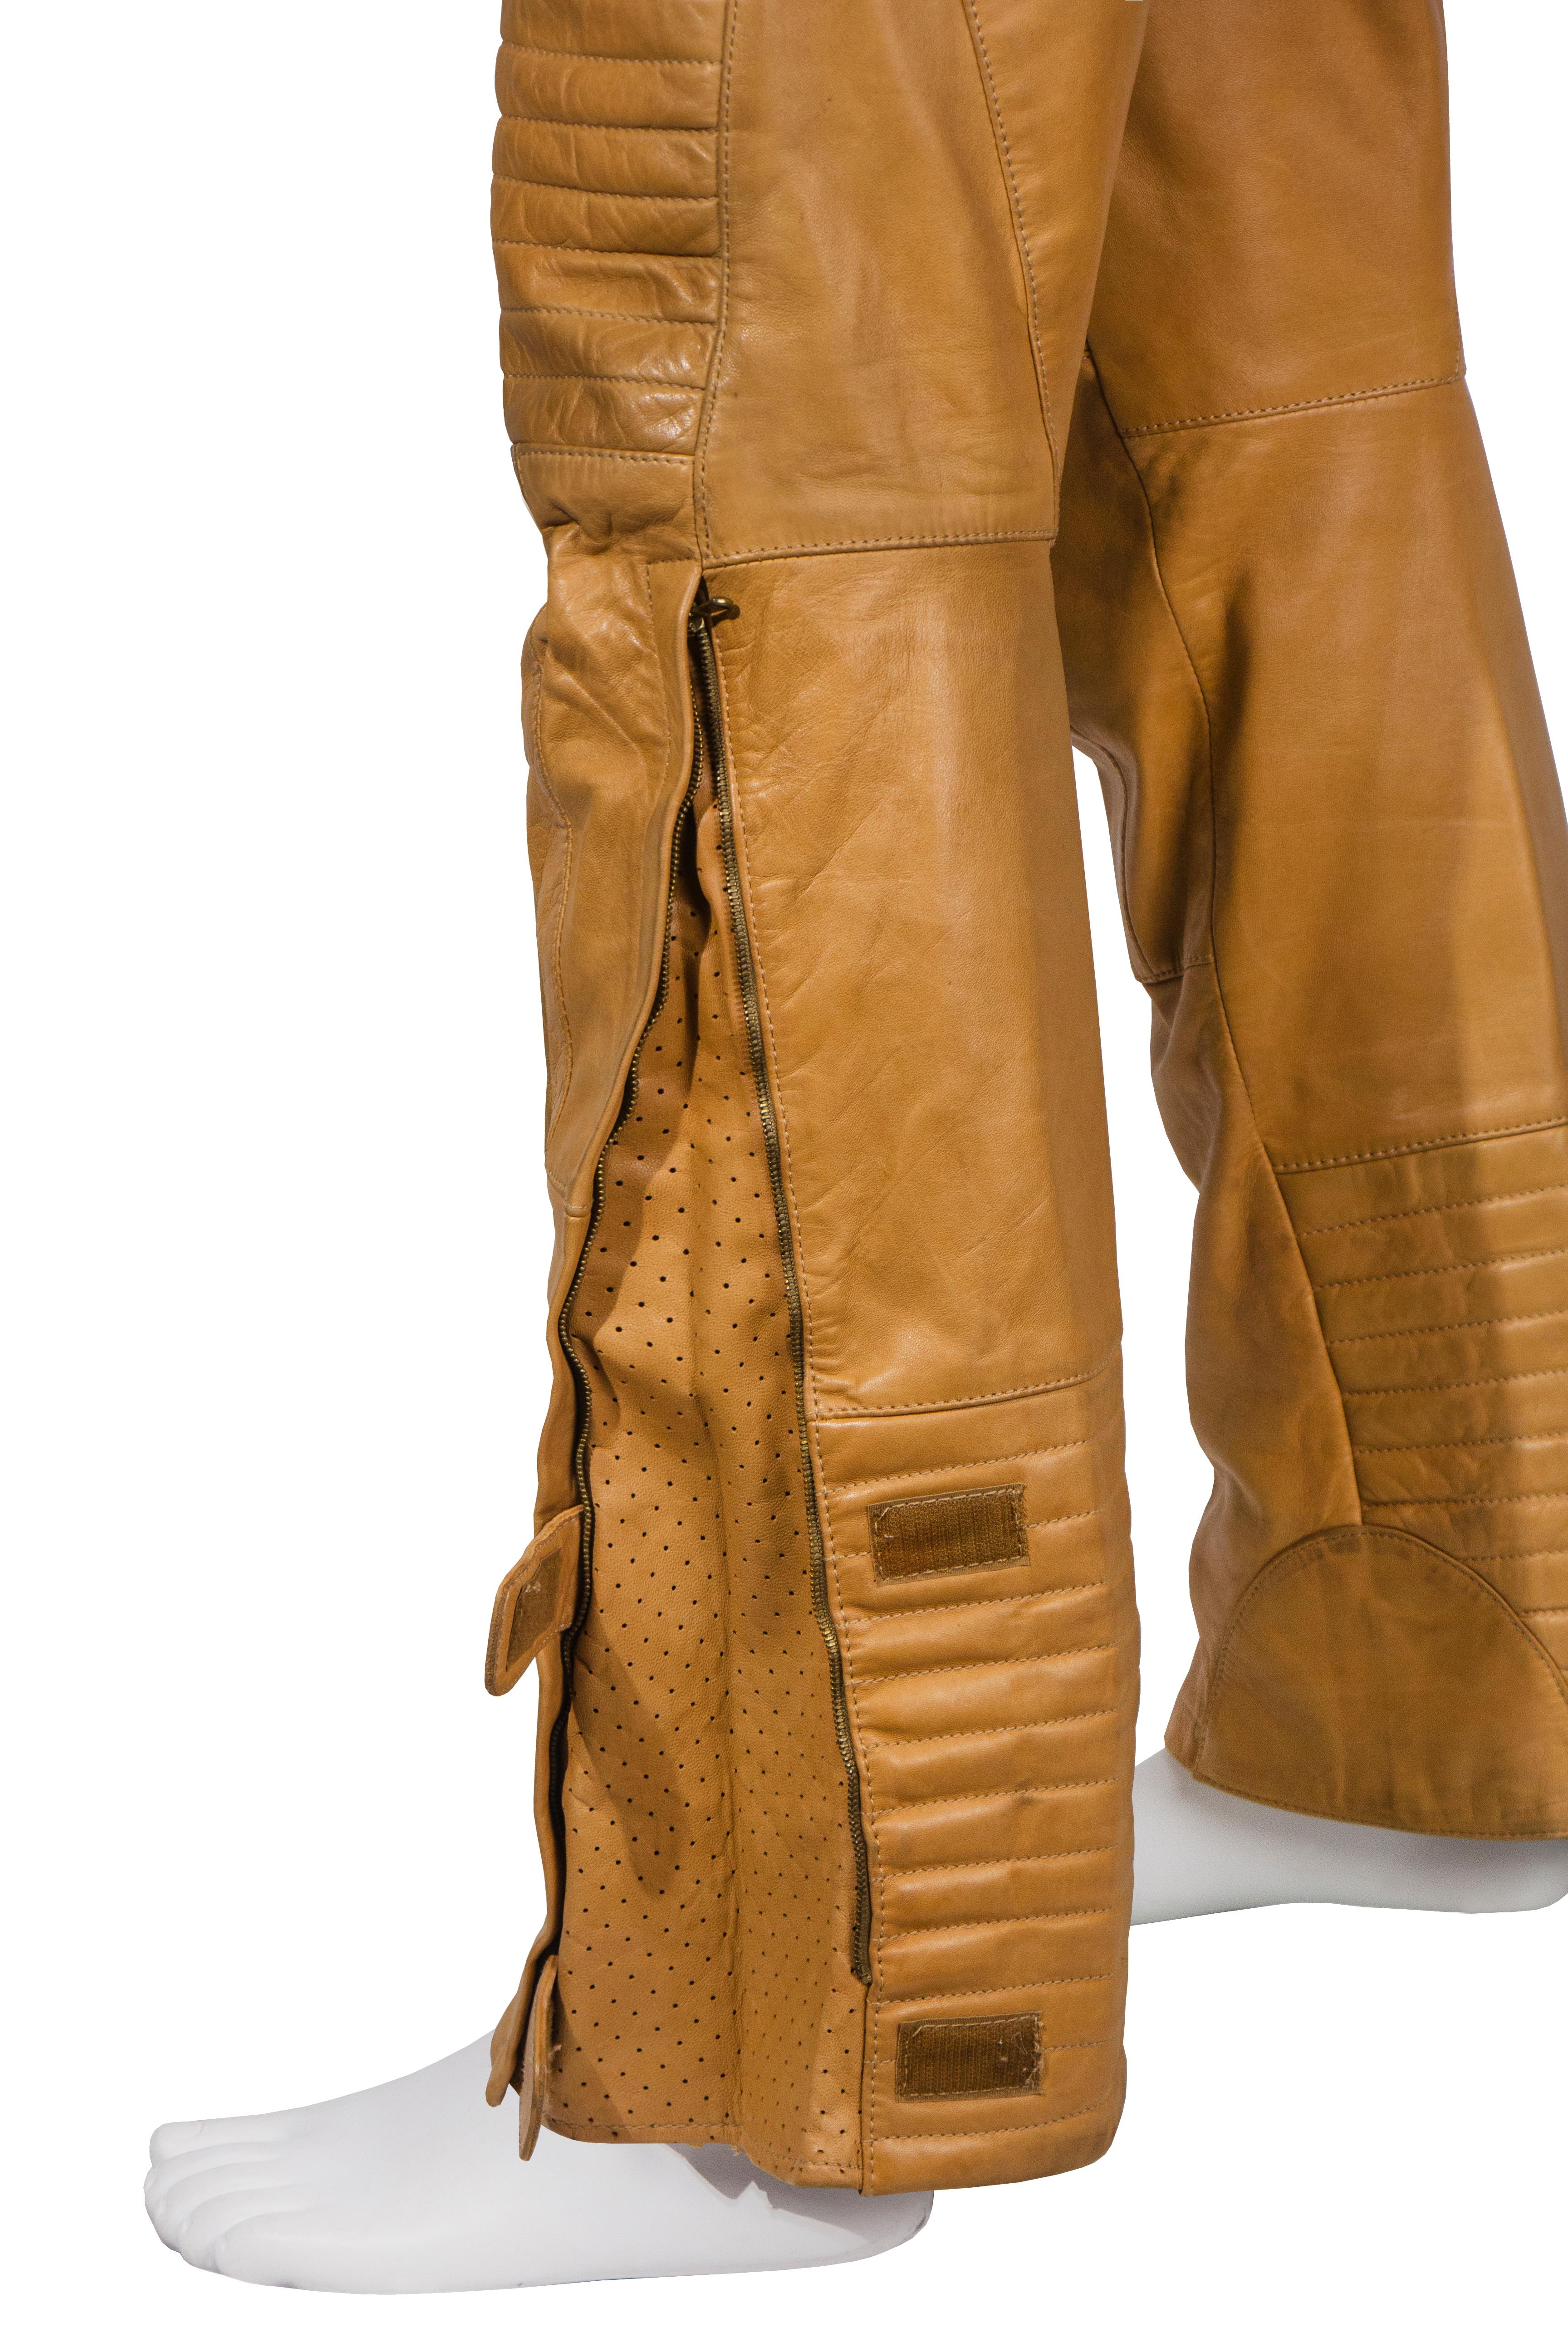 Gucci by Tom Ford men's tan leather motorcycle pants, fw 2000 For Sale 3